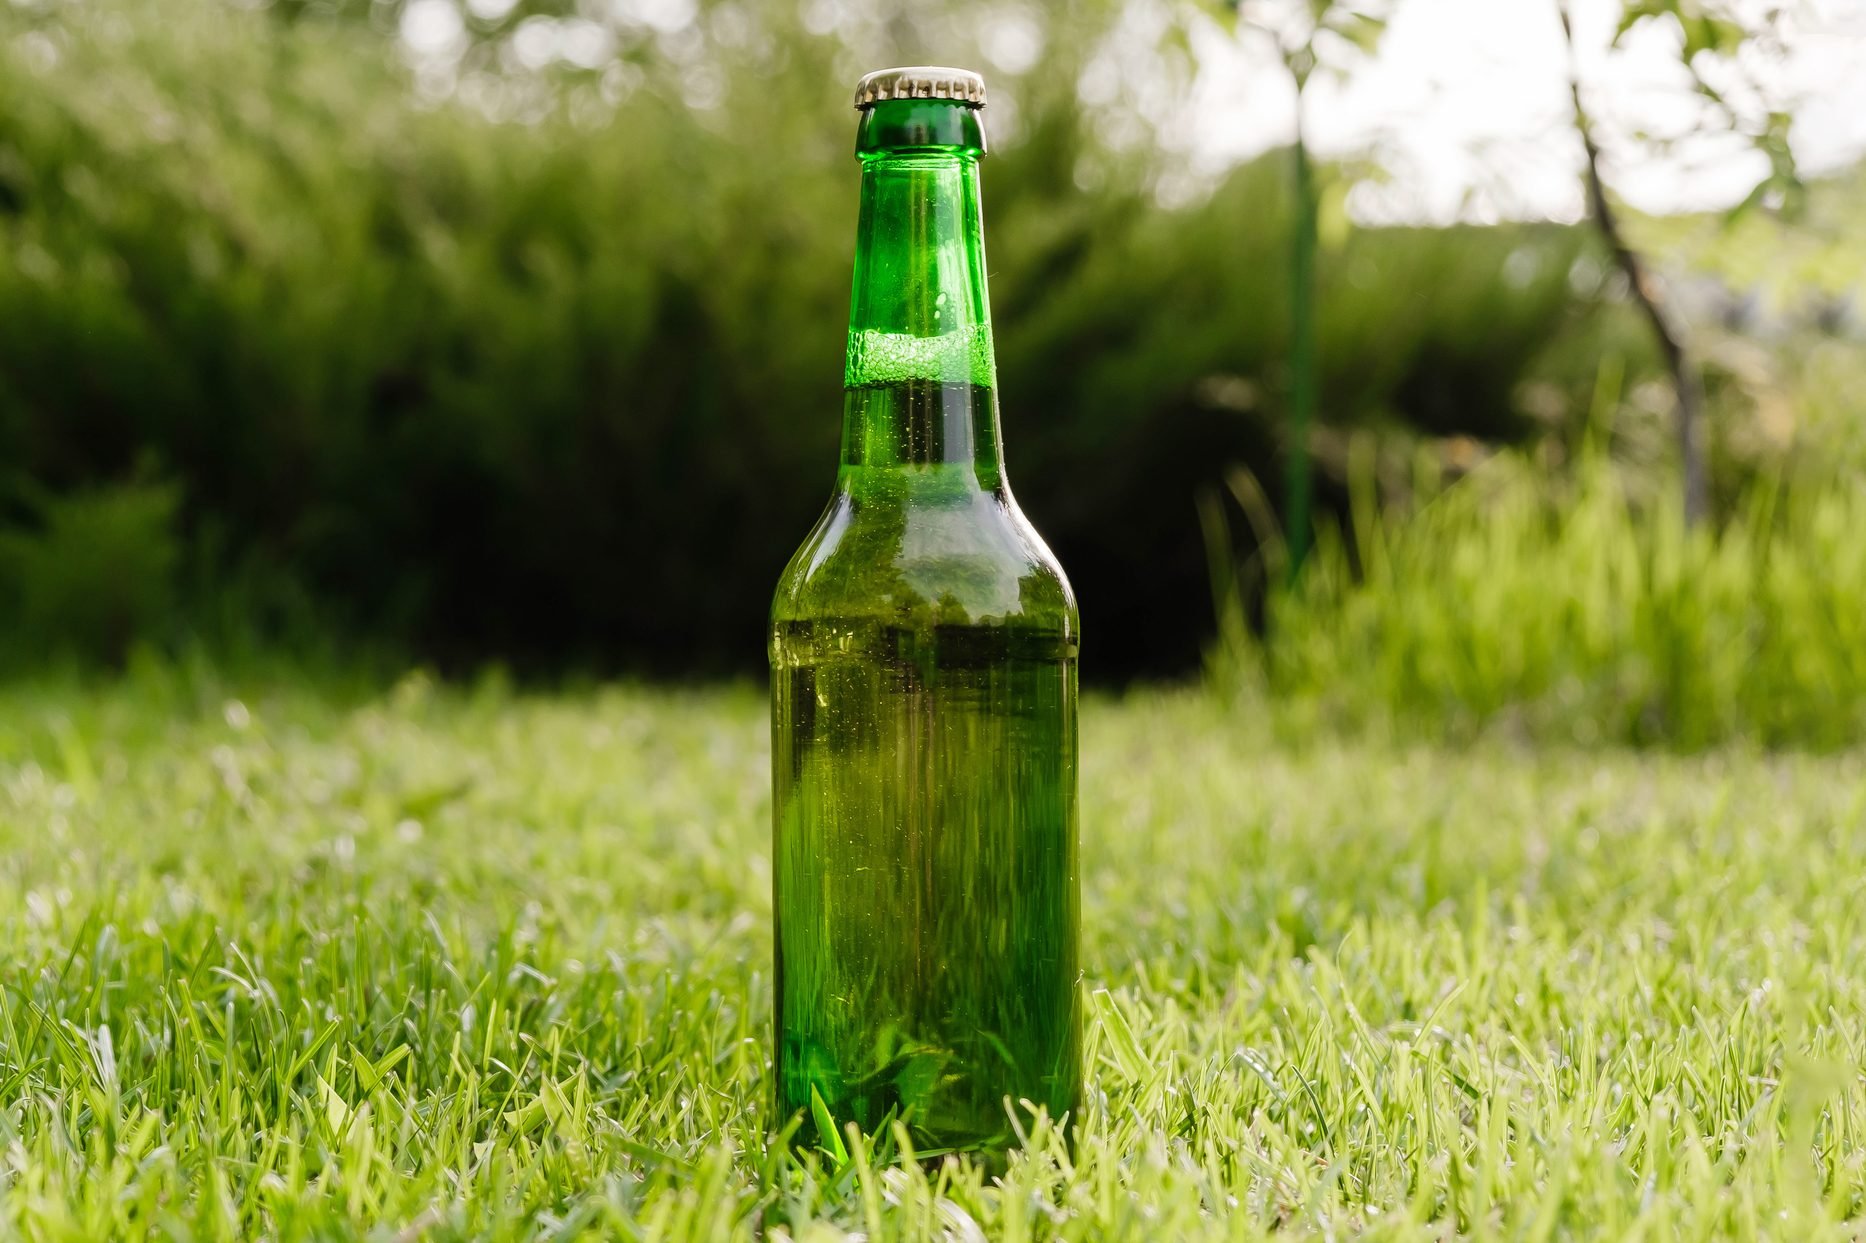 Can You Really Fertilize Your Lawn with Beer?